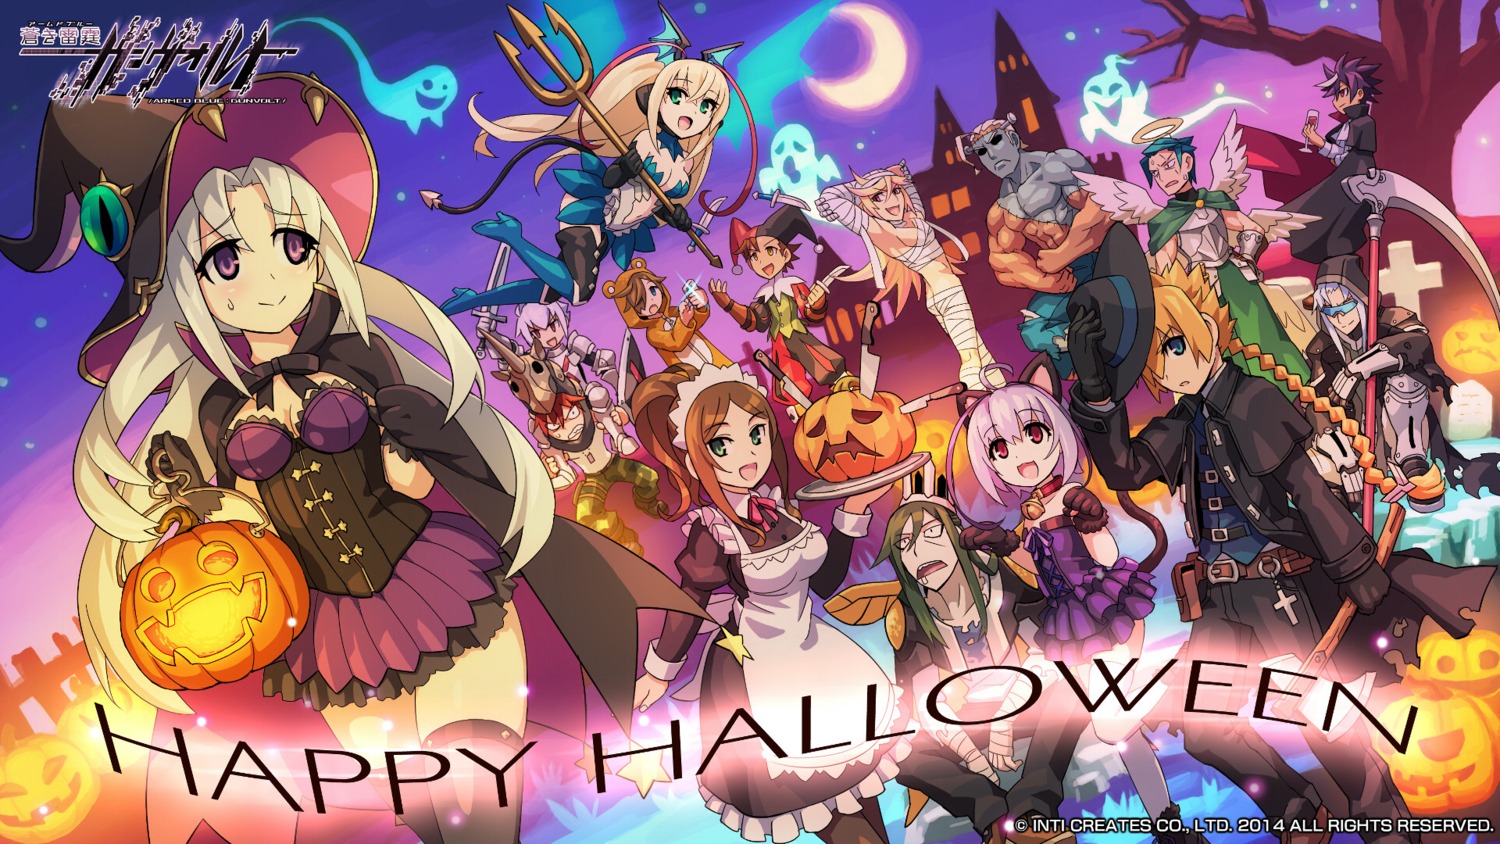 animal_ears armed_blue:_gunvolt armor bandages cleavage dress halloween heels maid megane nekomimi tagme tail thighhighs wallpaper weapon wings witch